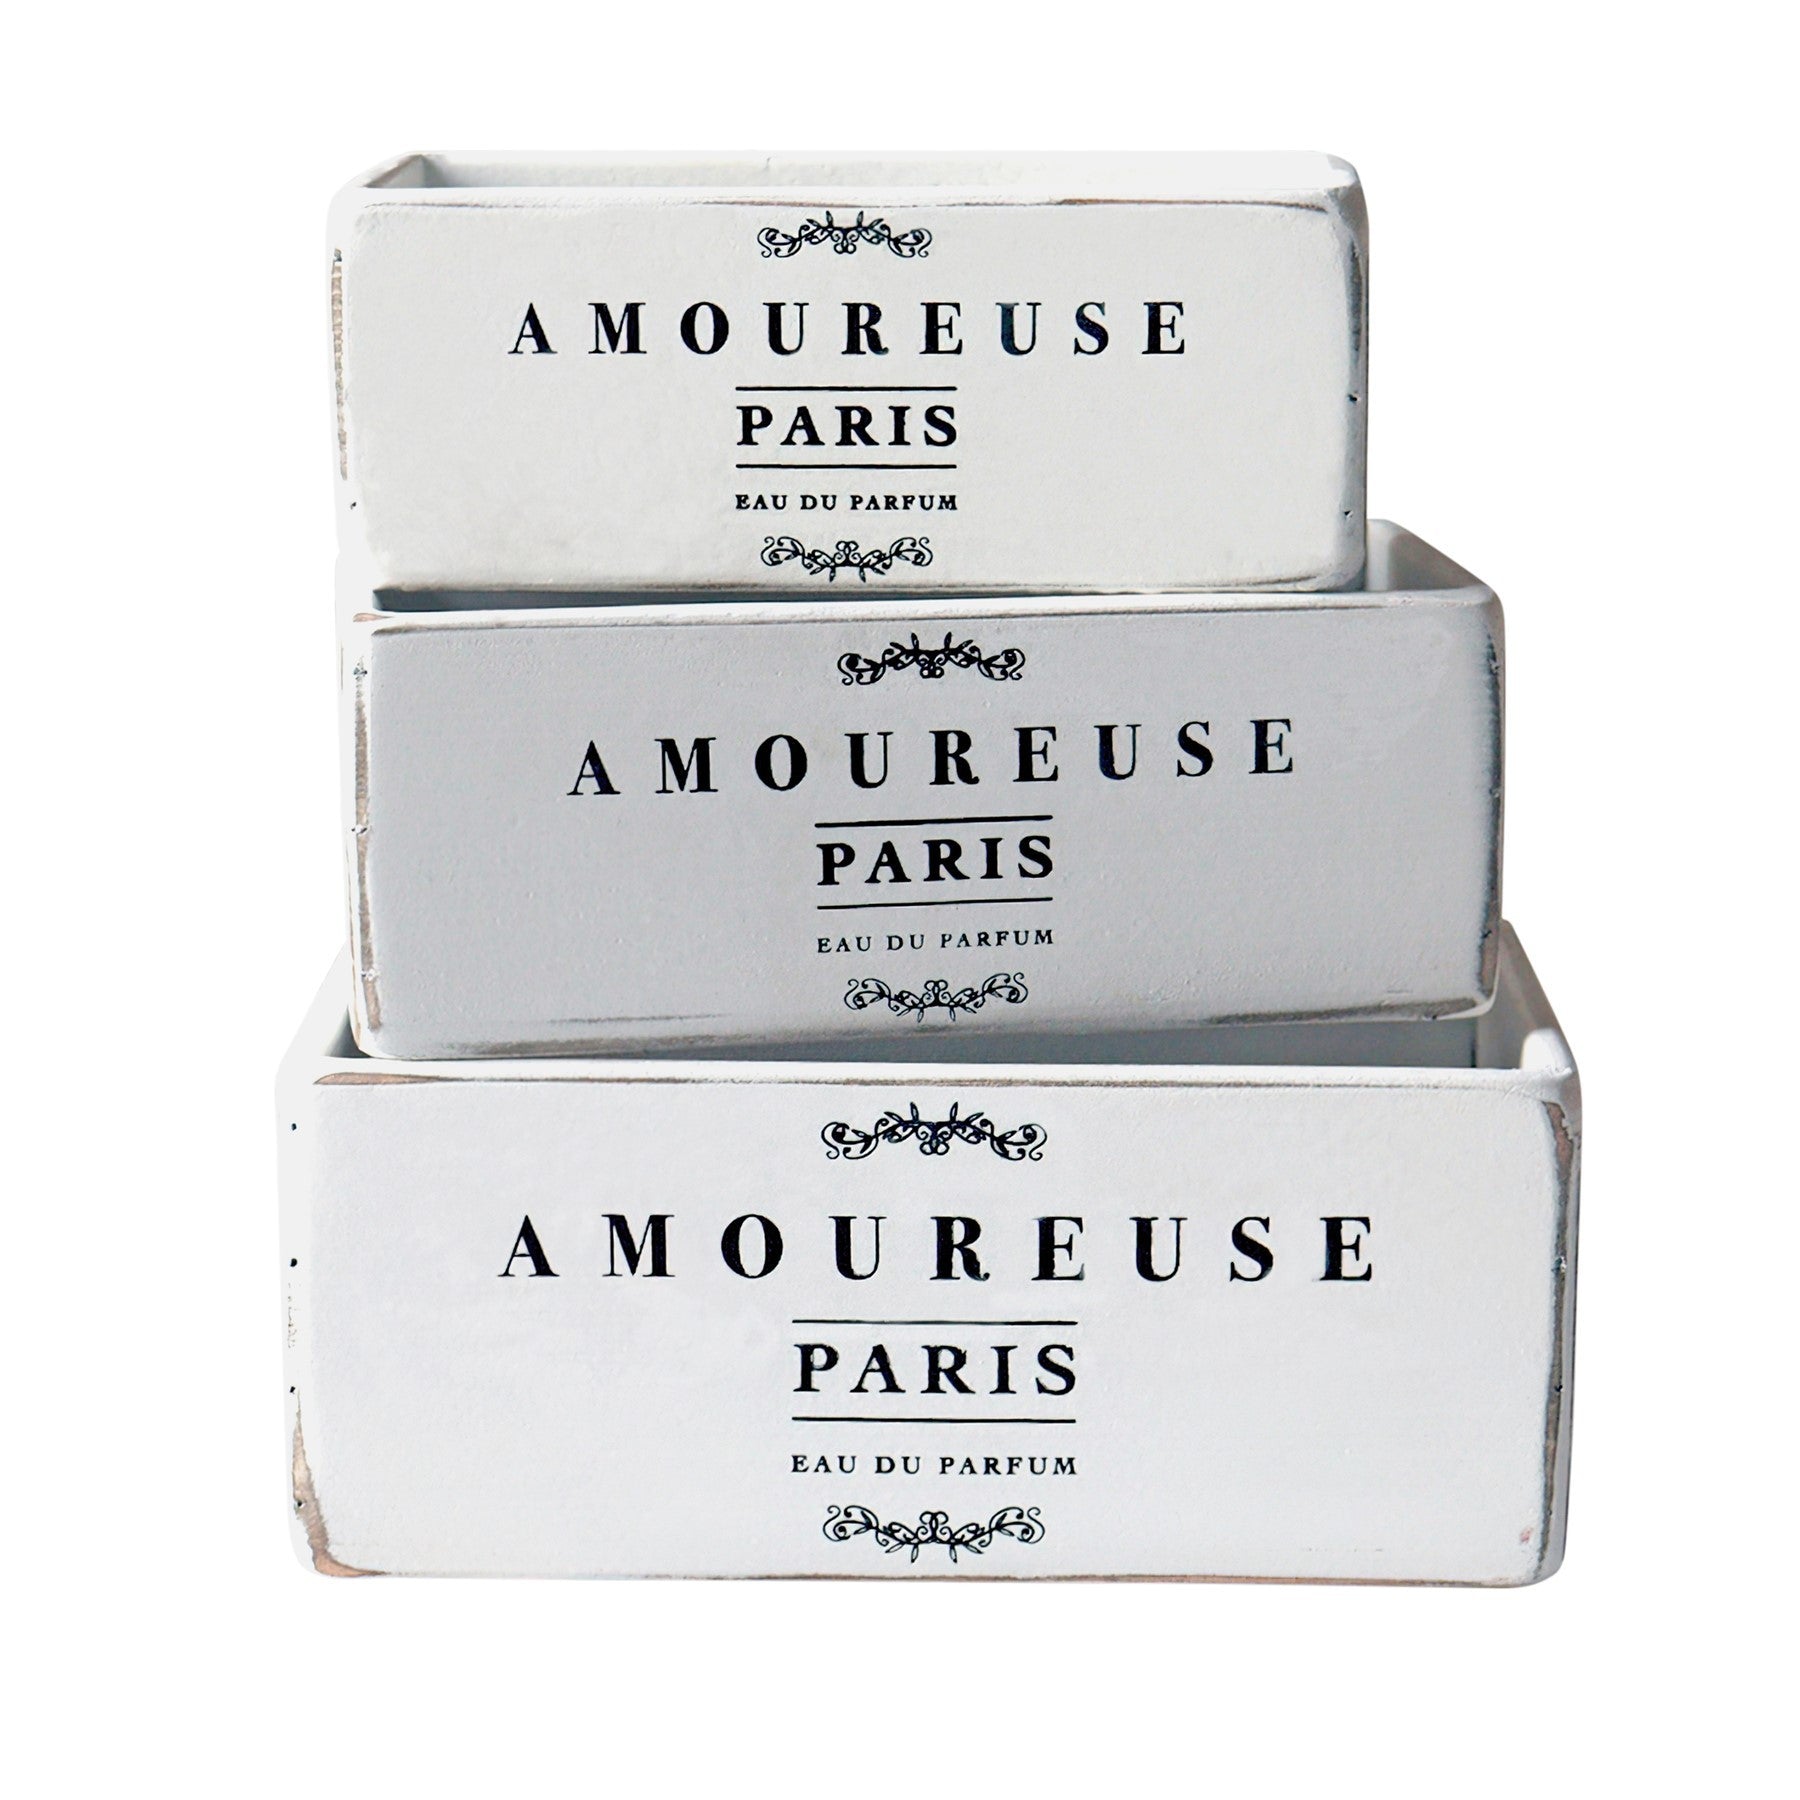 View White Amoureuse Crates Set of 3 Crates information